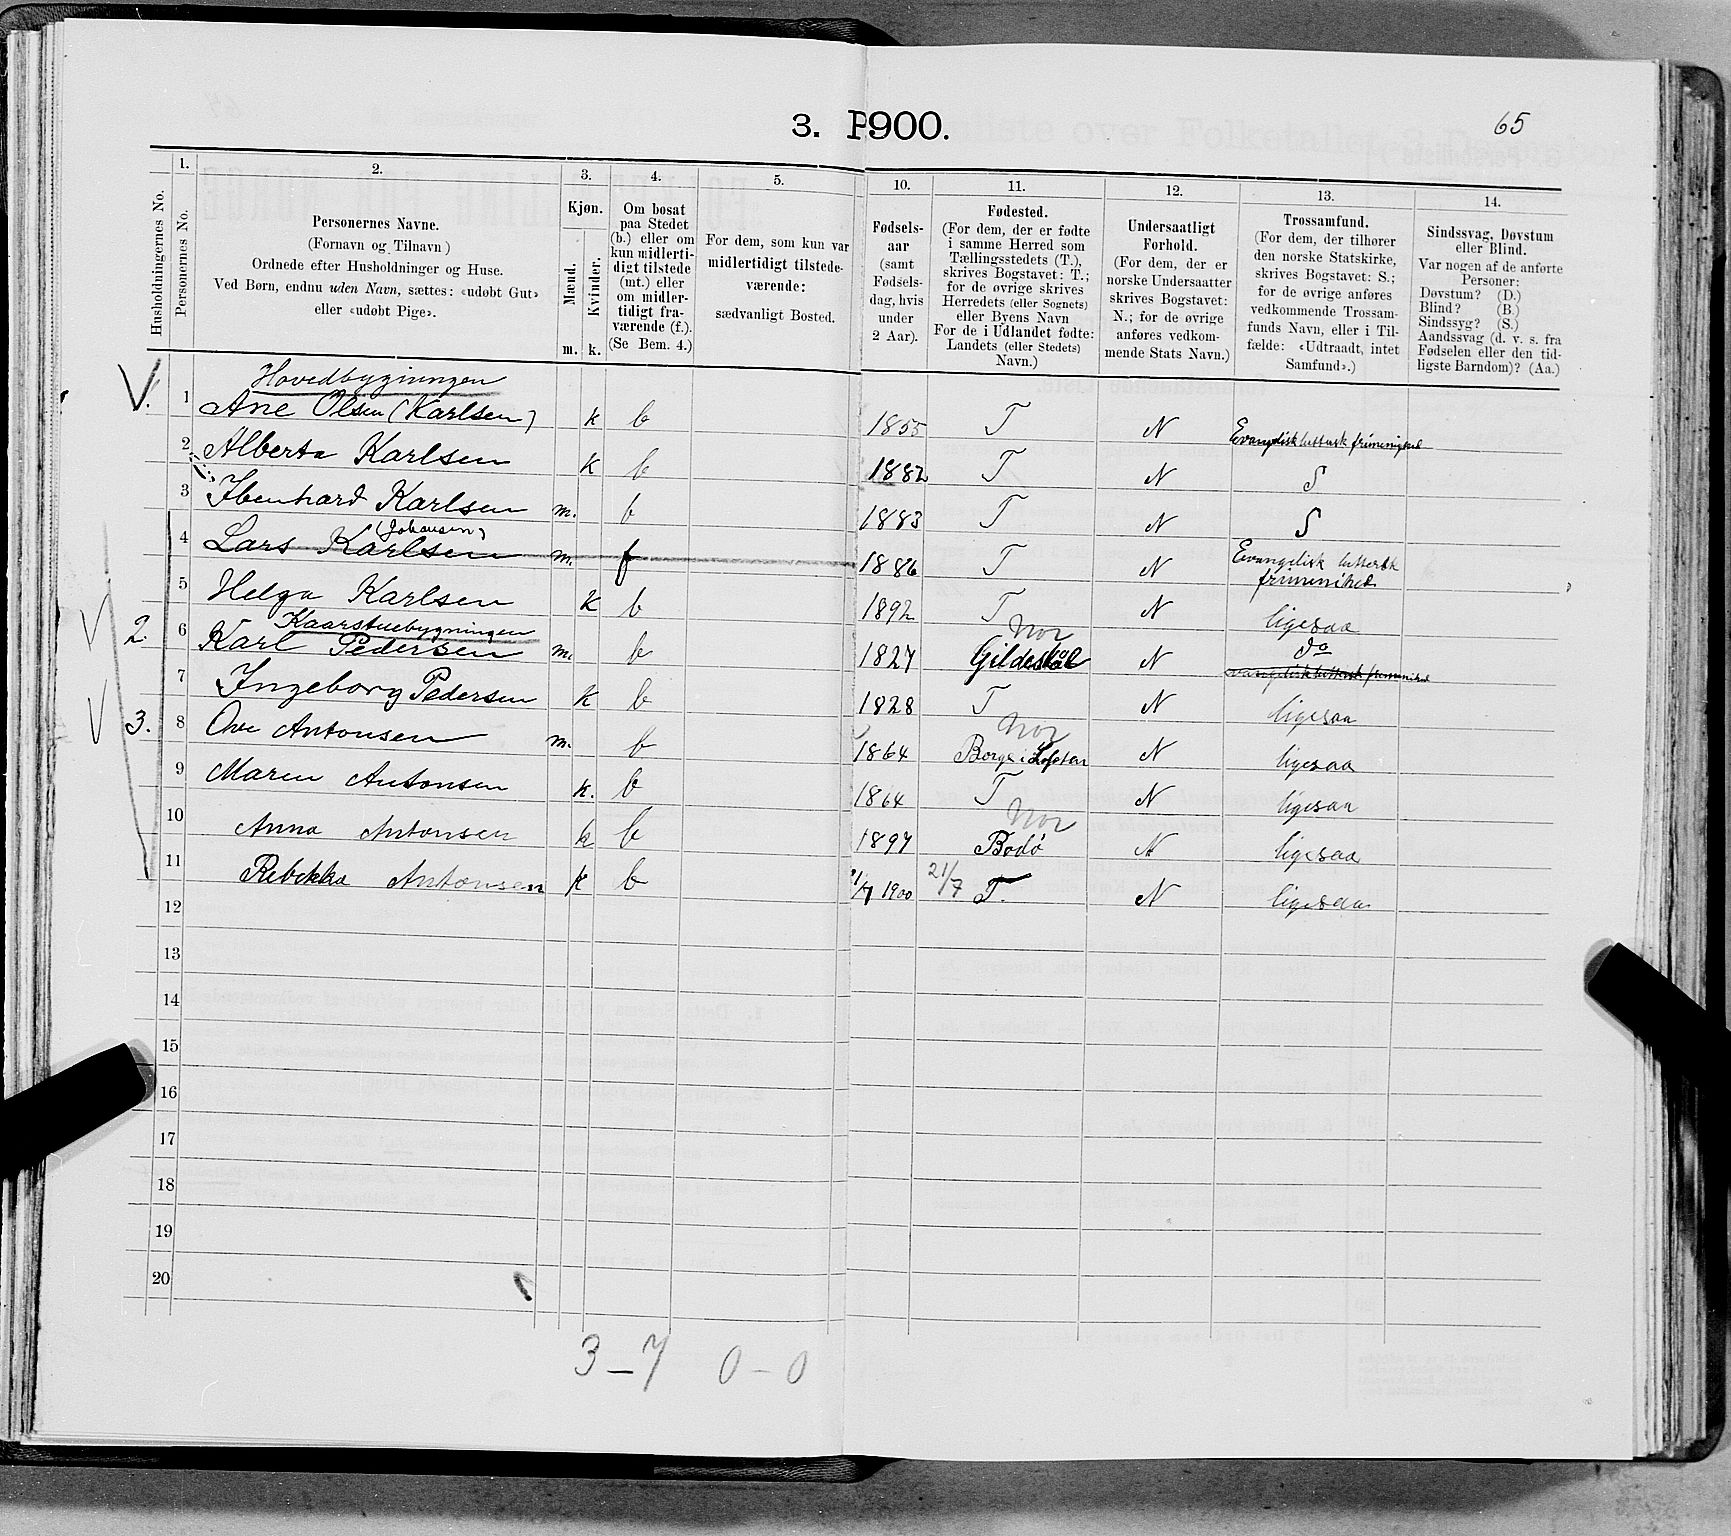 SAT, 1900 census for Meløy, 1900, p. 1152